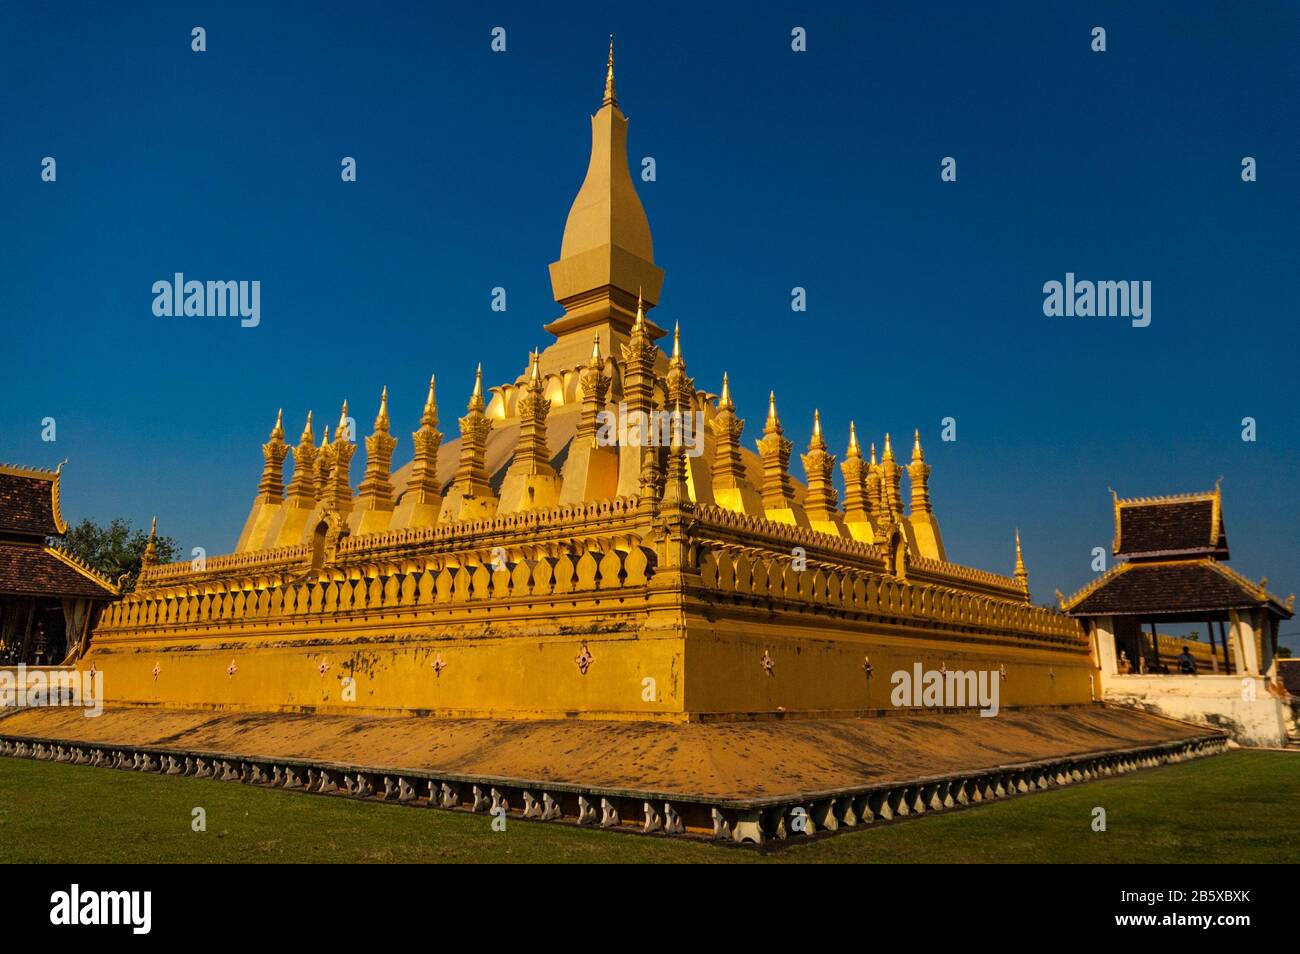 National monument and Buddhist religious structure Pha That Luang was ereceted from 1566 on the site of a Khmer Temple. Stock Photo